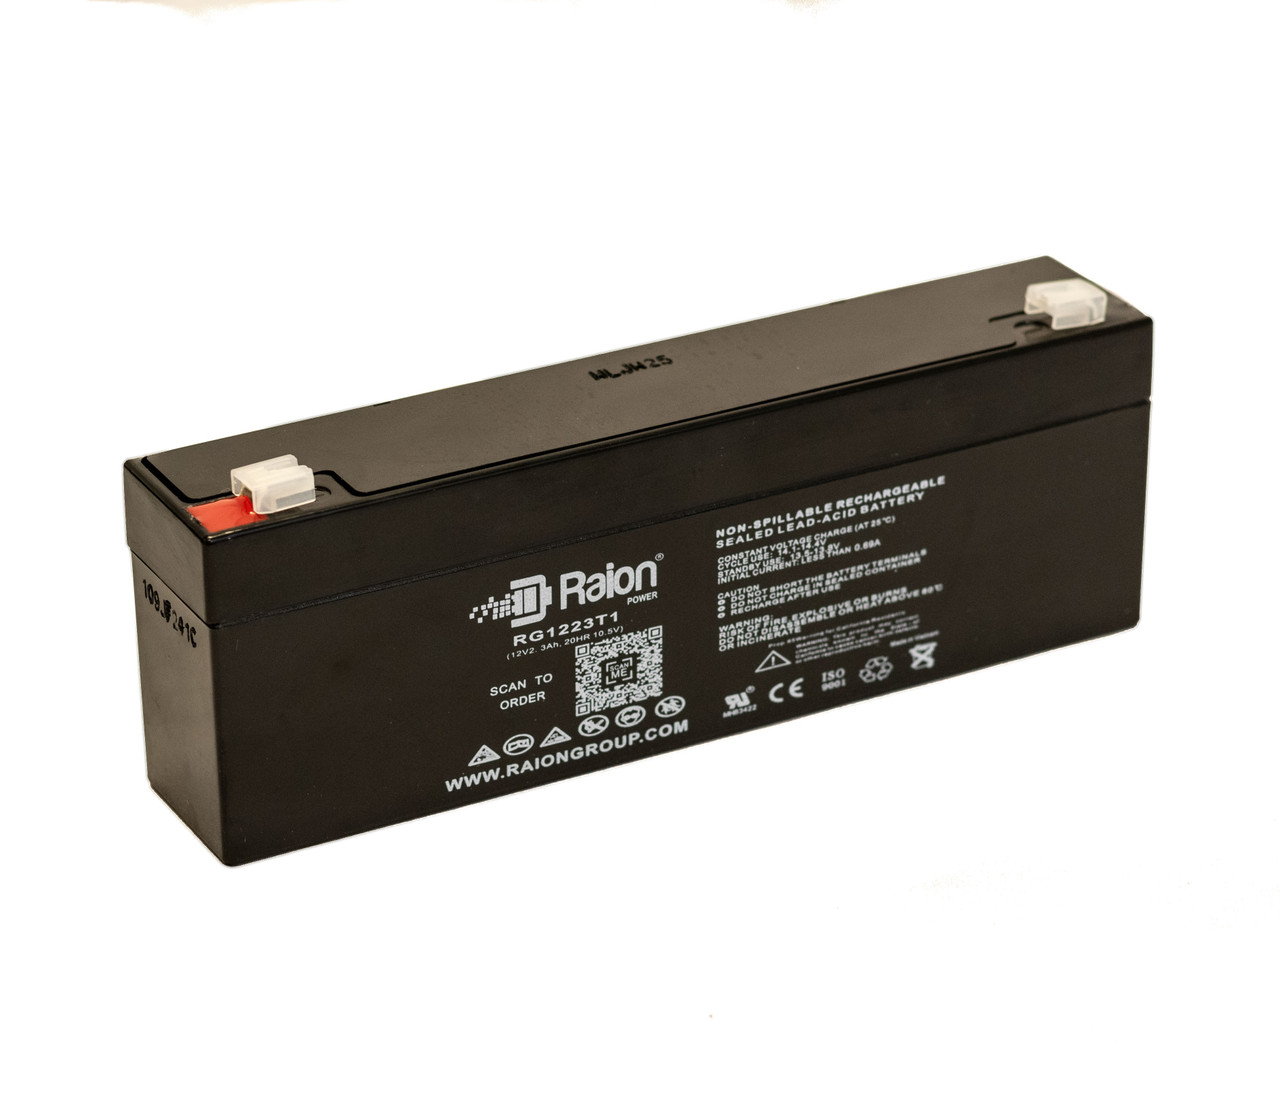 Raion Power RG1223T1 Replacement Battery for Napel NP1220